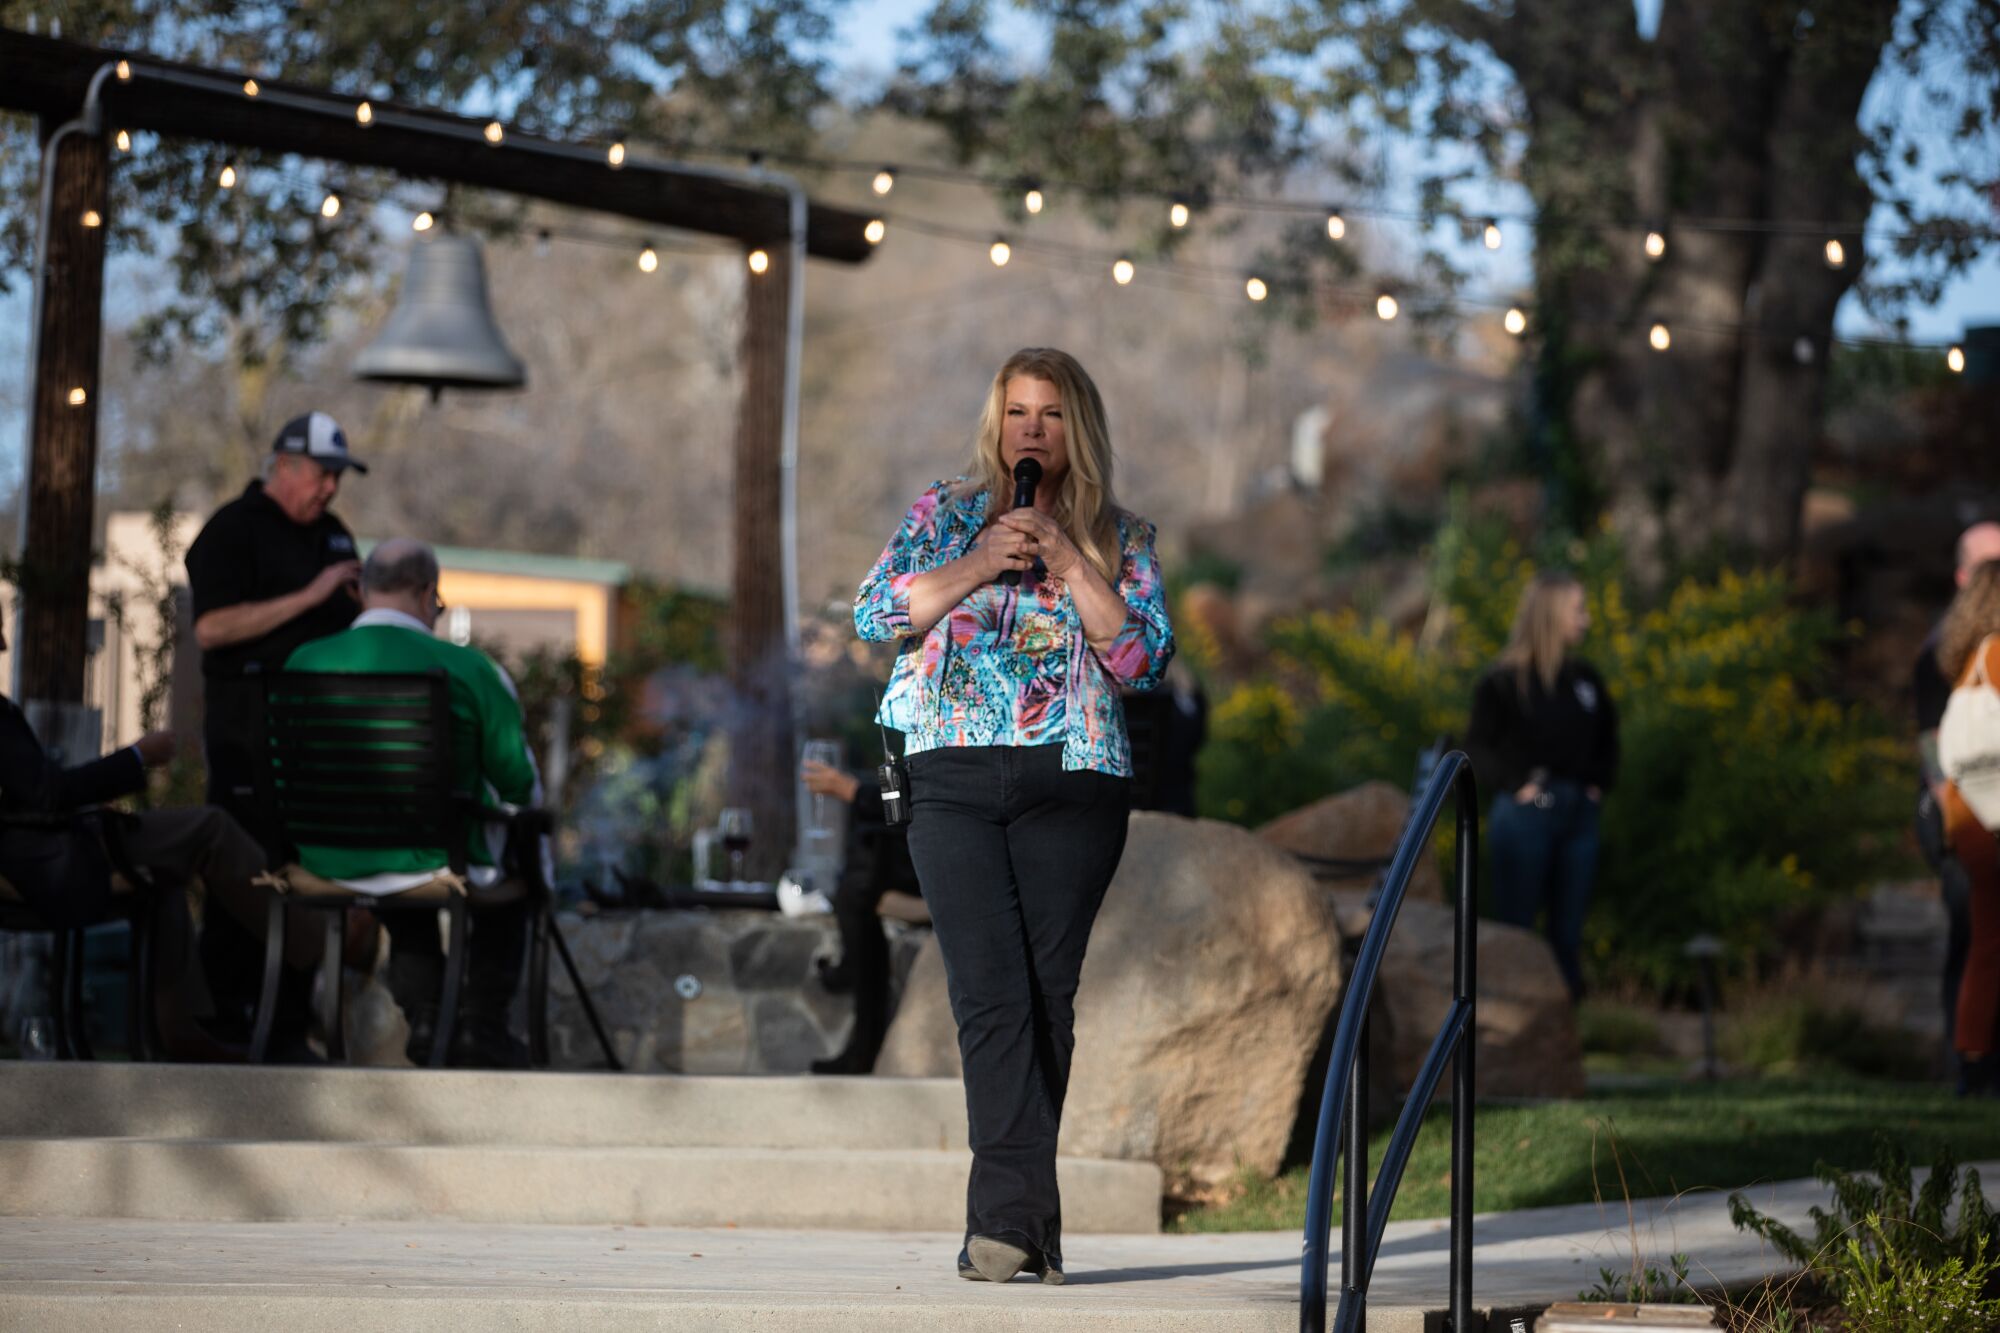 Alpine, CA - April 01: Lions Tigers and Bears Founder Bobbi Brink speaks at an event.